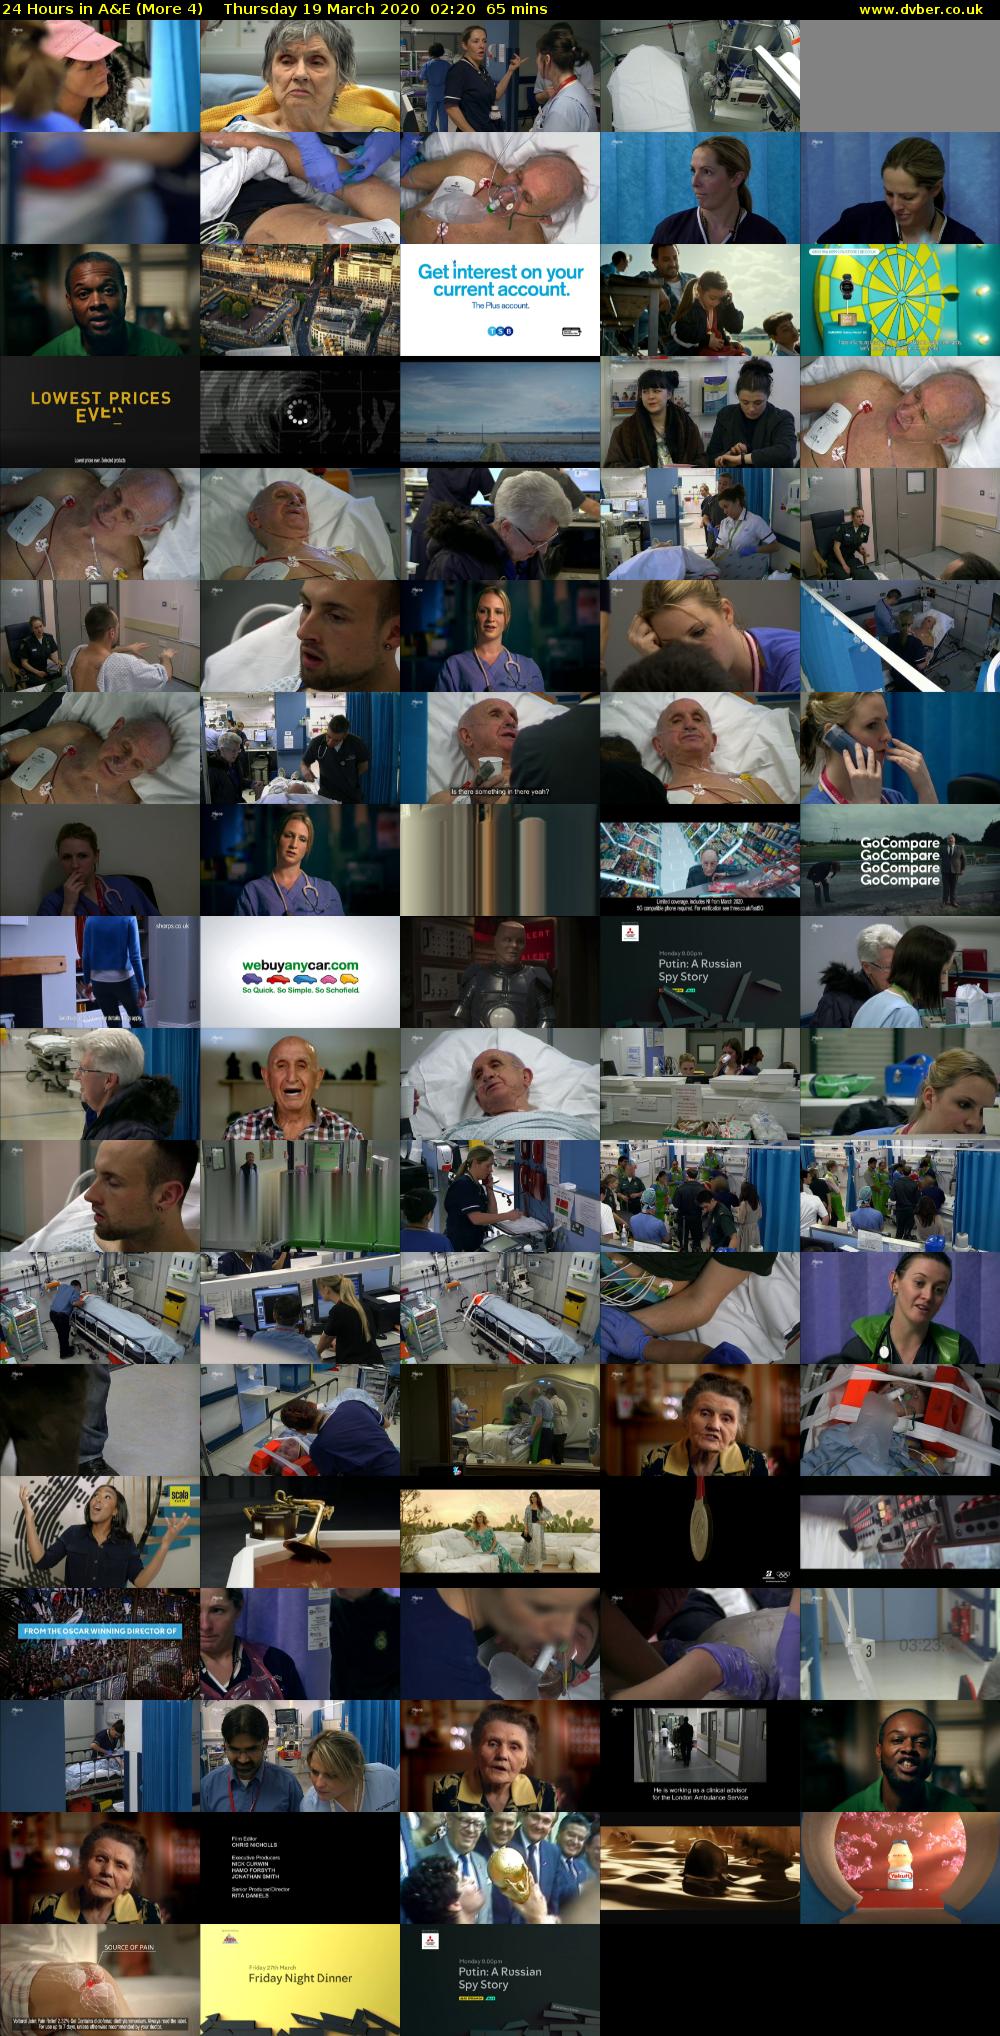 24 Hours in A&E (More 4) Thursday 19 March 2020 02:20 - 03:25